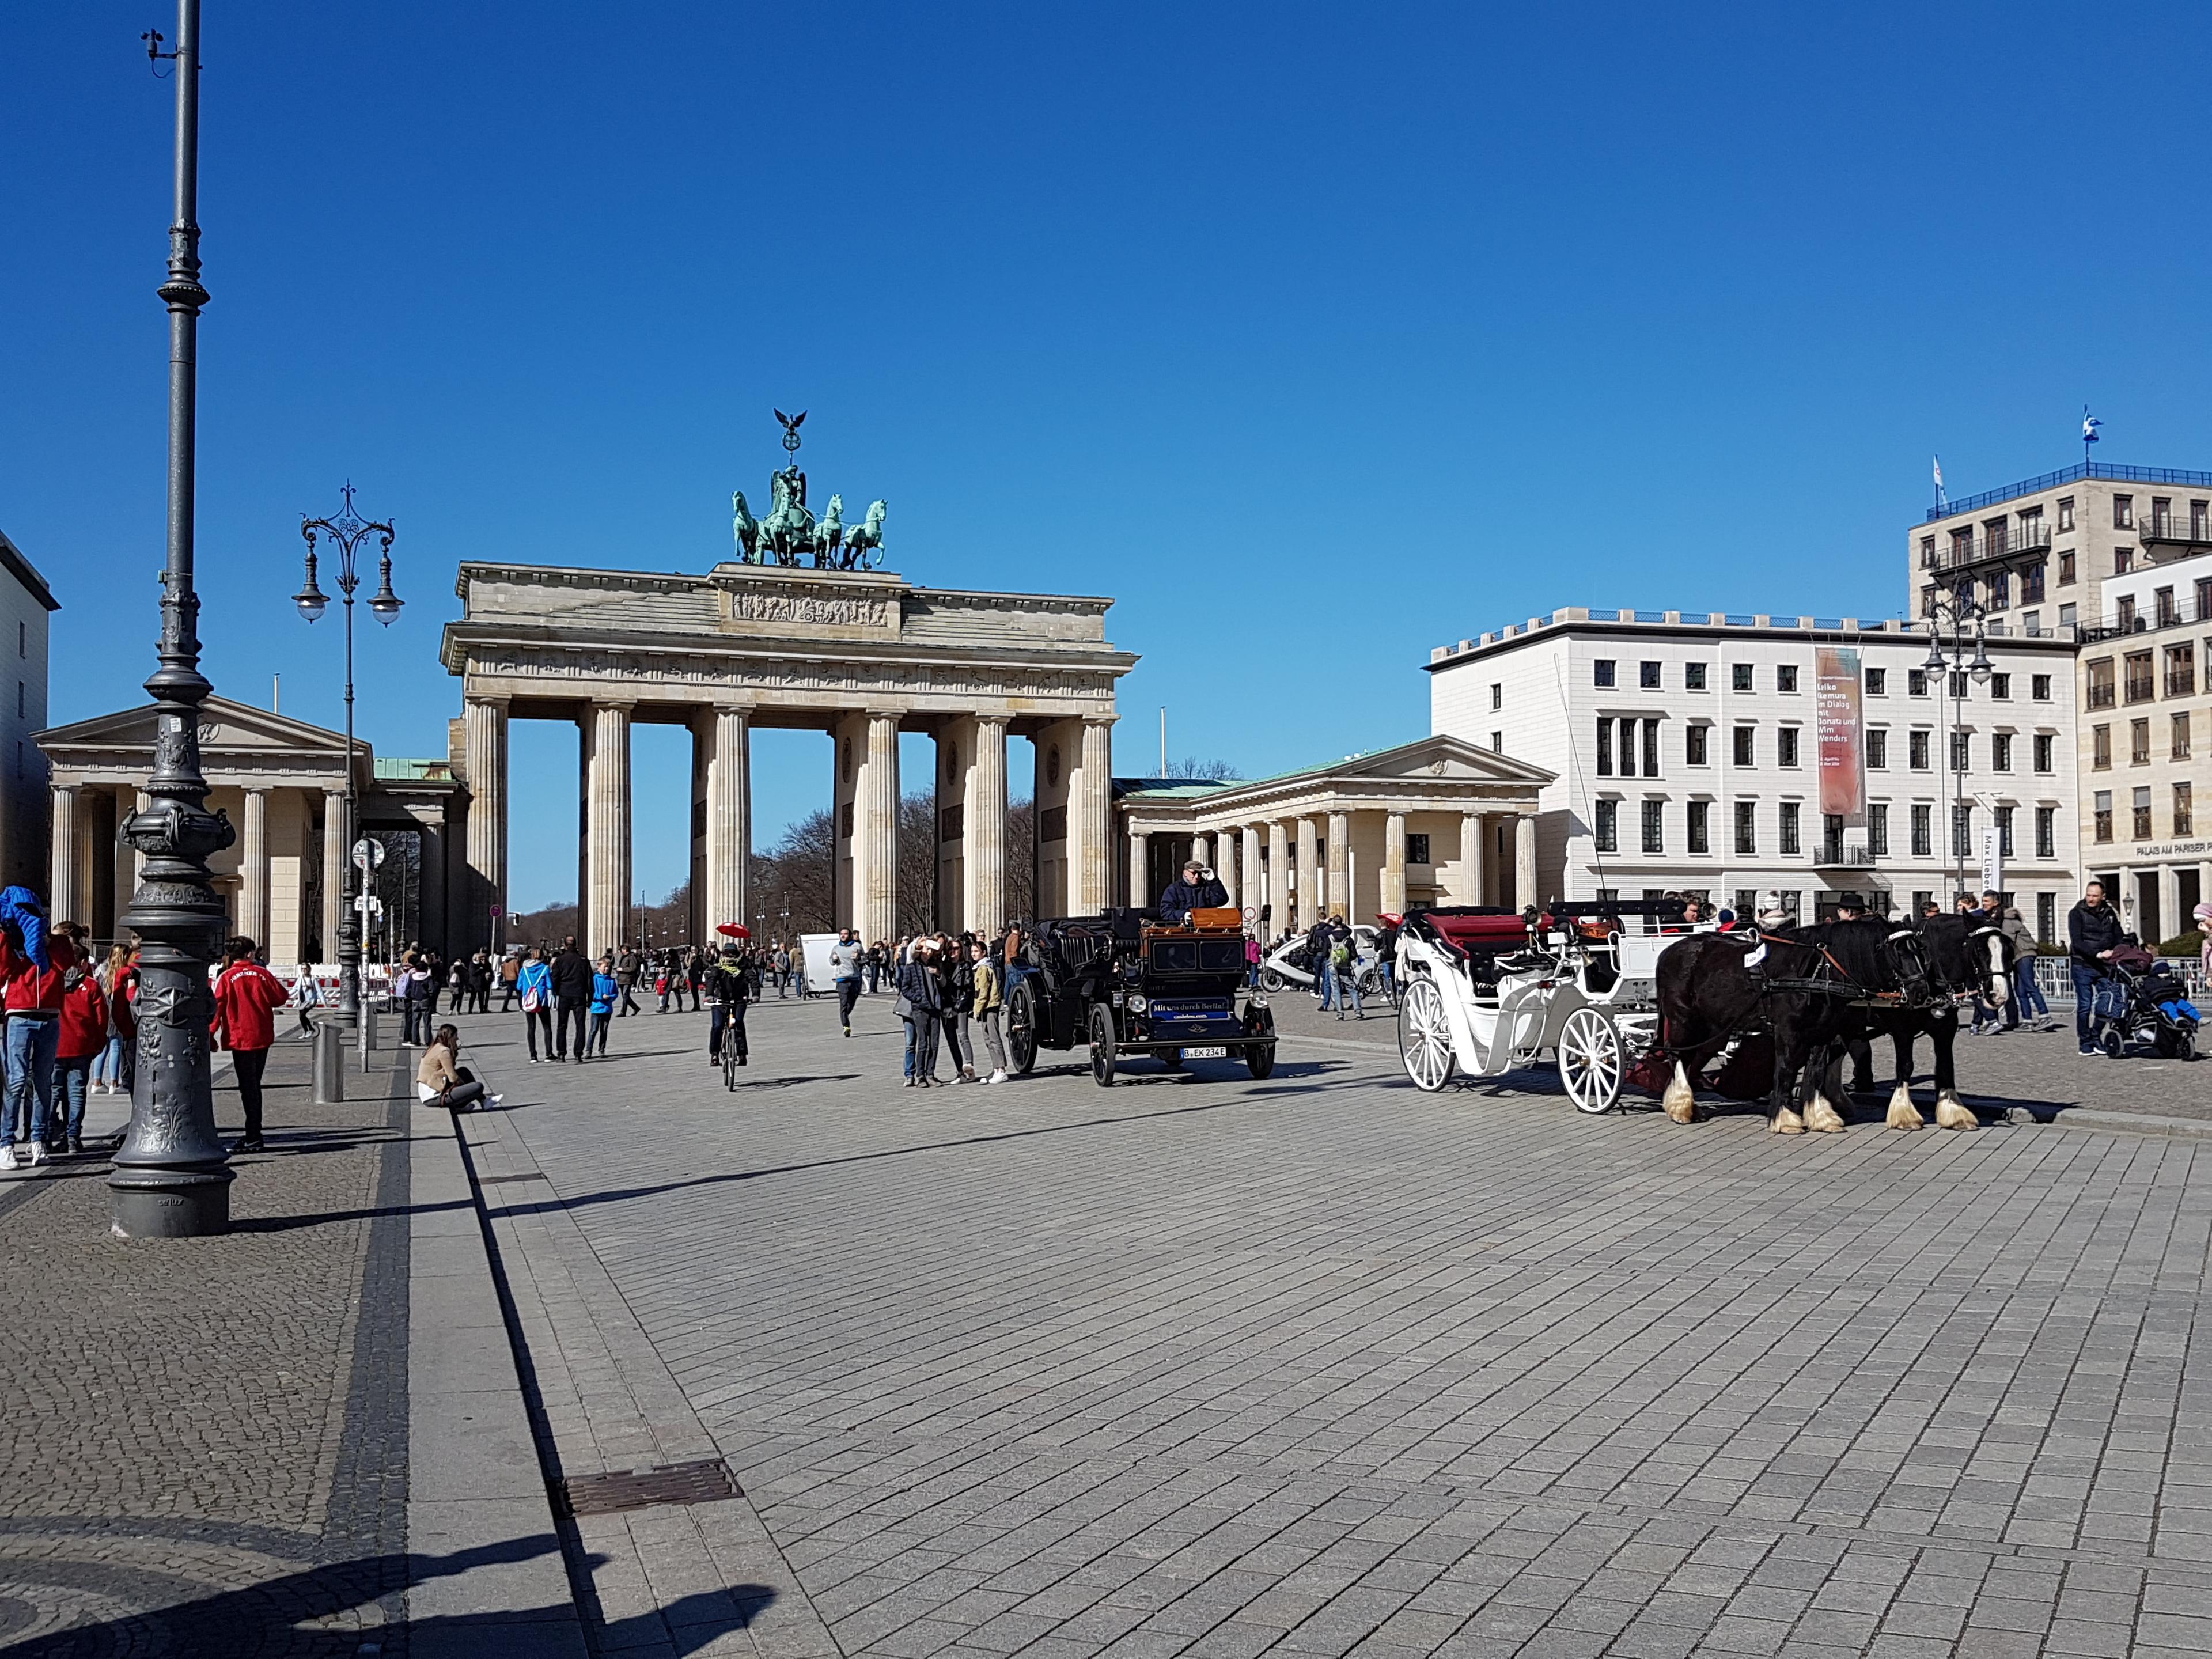 Cover image of this place Brandenburger Tor